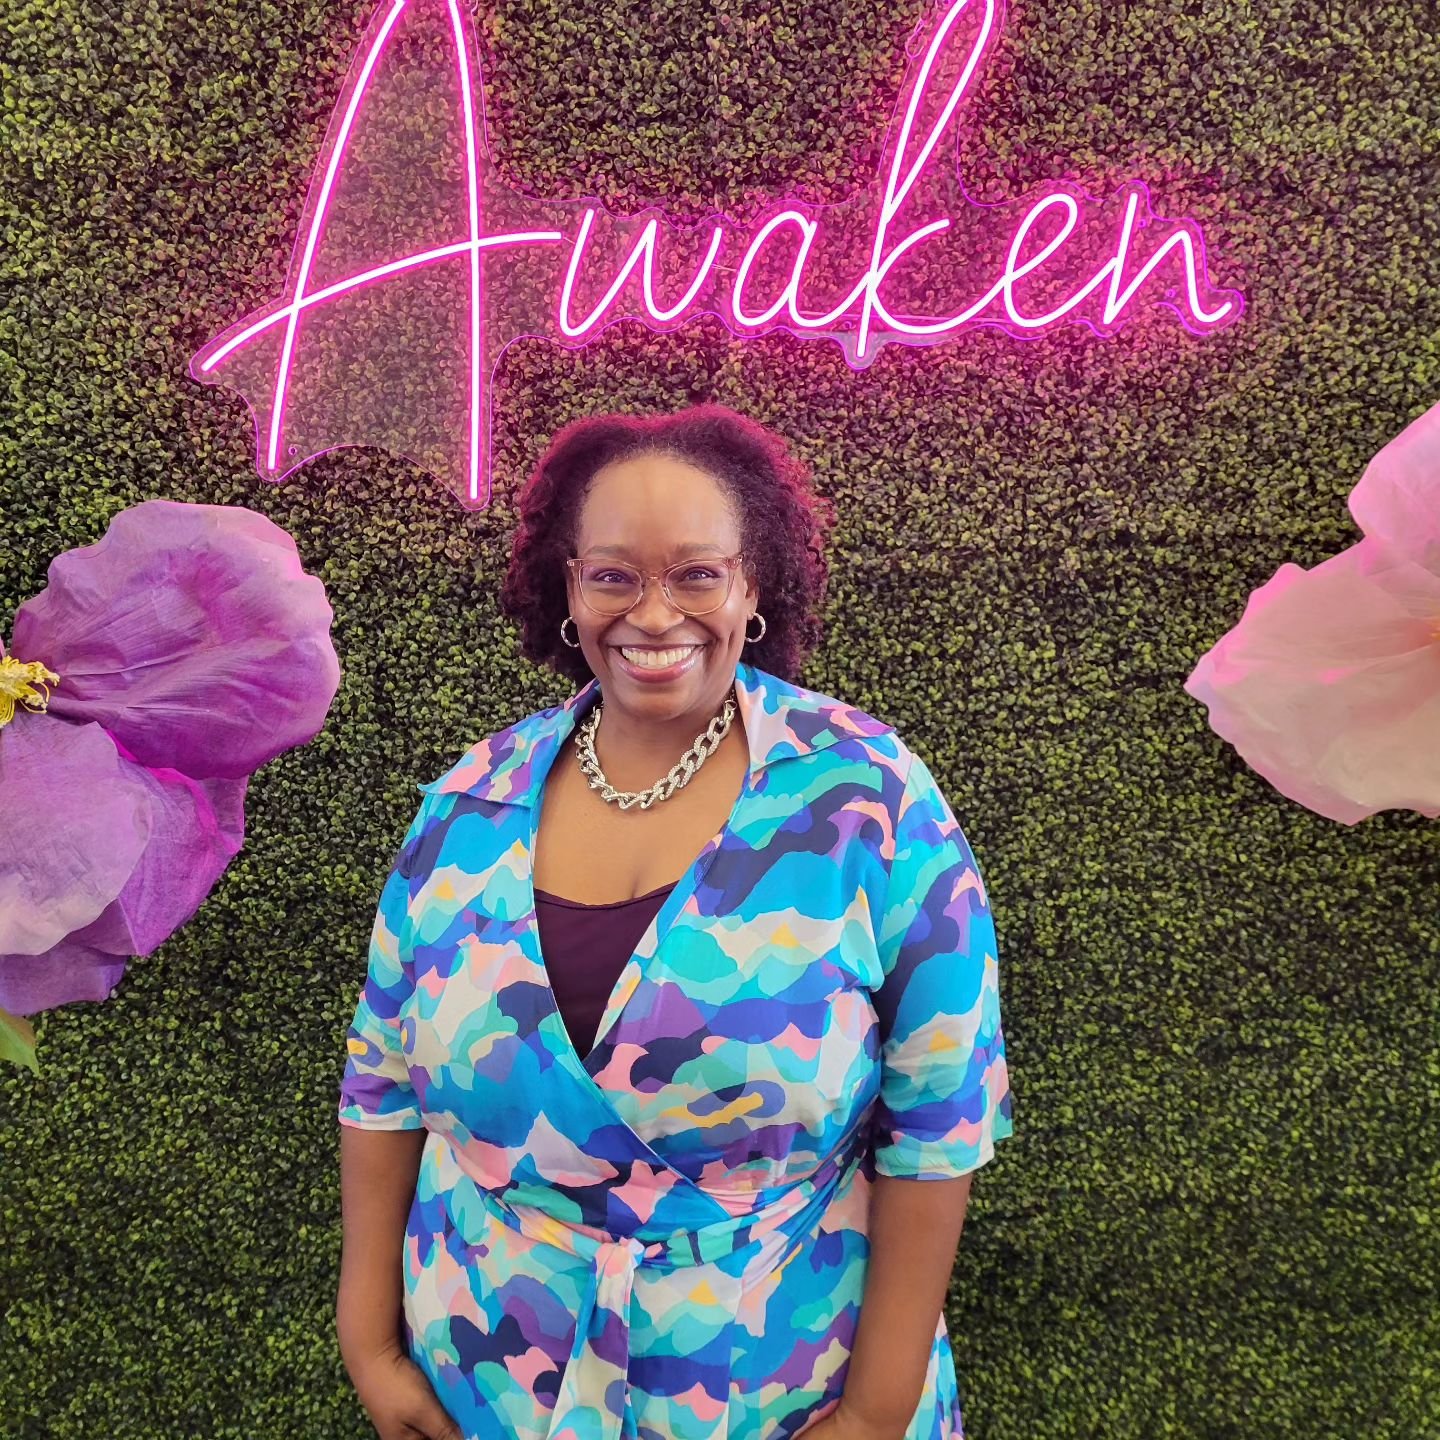 𝘽𝙇𝙊𝙊𝙈𝙄𝙁𝙔 🌸🌸that was the theme today at a Women's Brunch I attended today, the message was SO ON TIME.  The entire day was WONDERFUL 🙌🏾🙌🏾. I wore my #V2000 dress that I fixed the hem on during the @sewroritywear #sewrorityafterdark last 